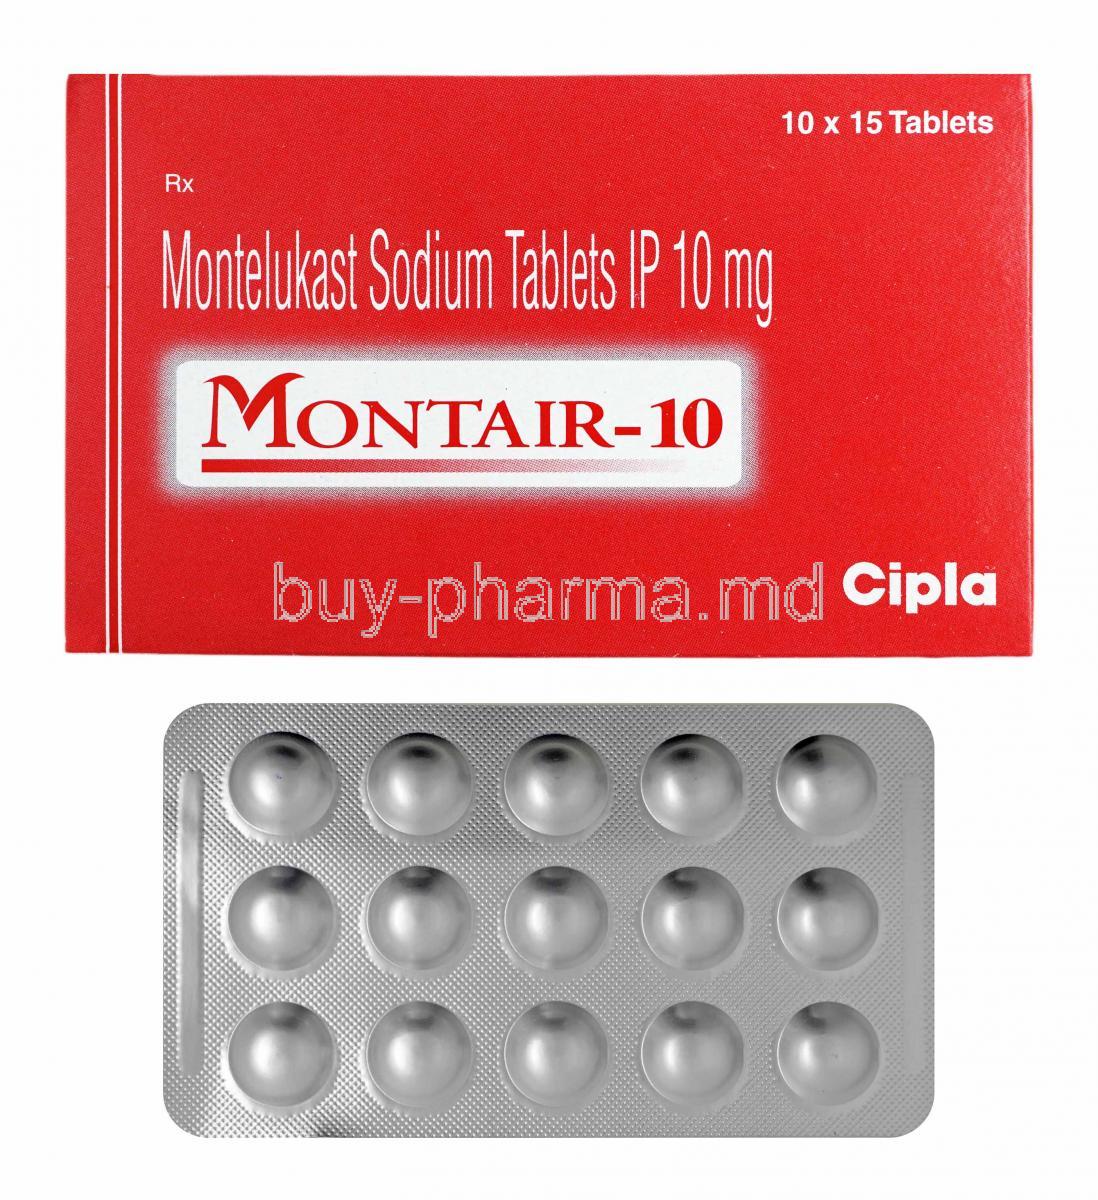 Montair, Montelukast 10mg box and tablets